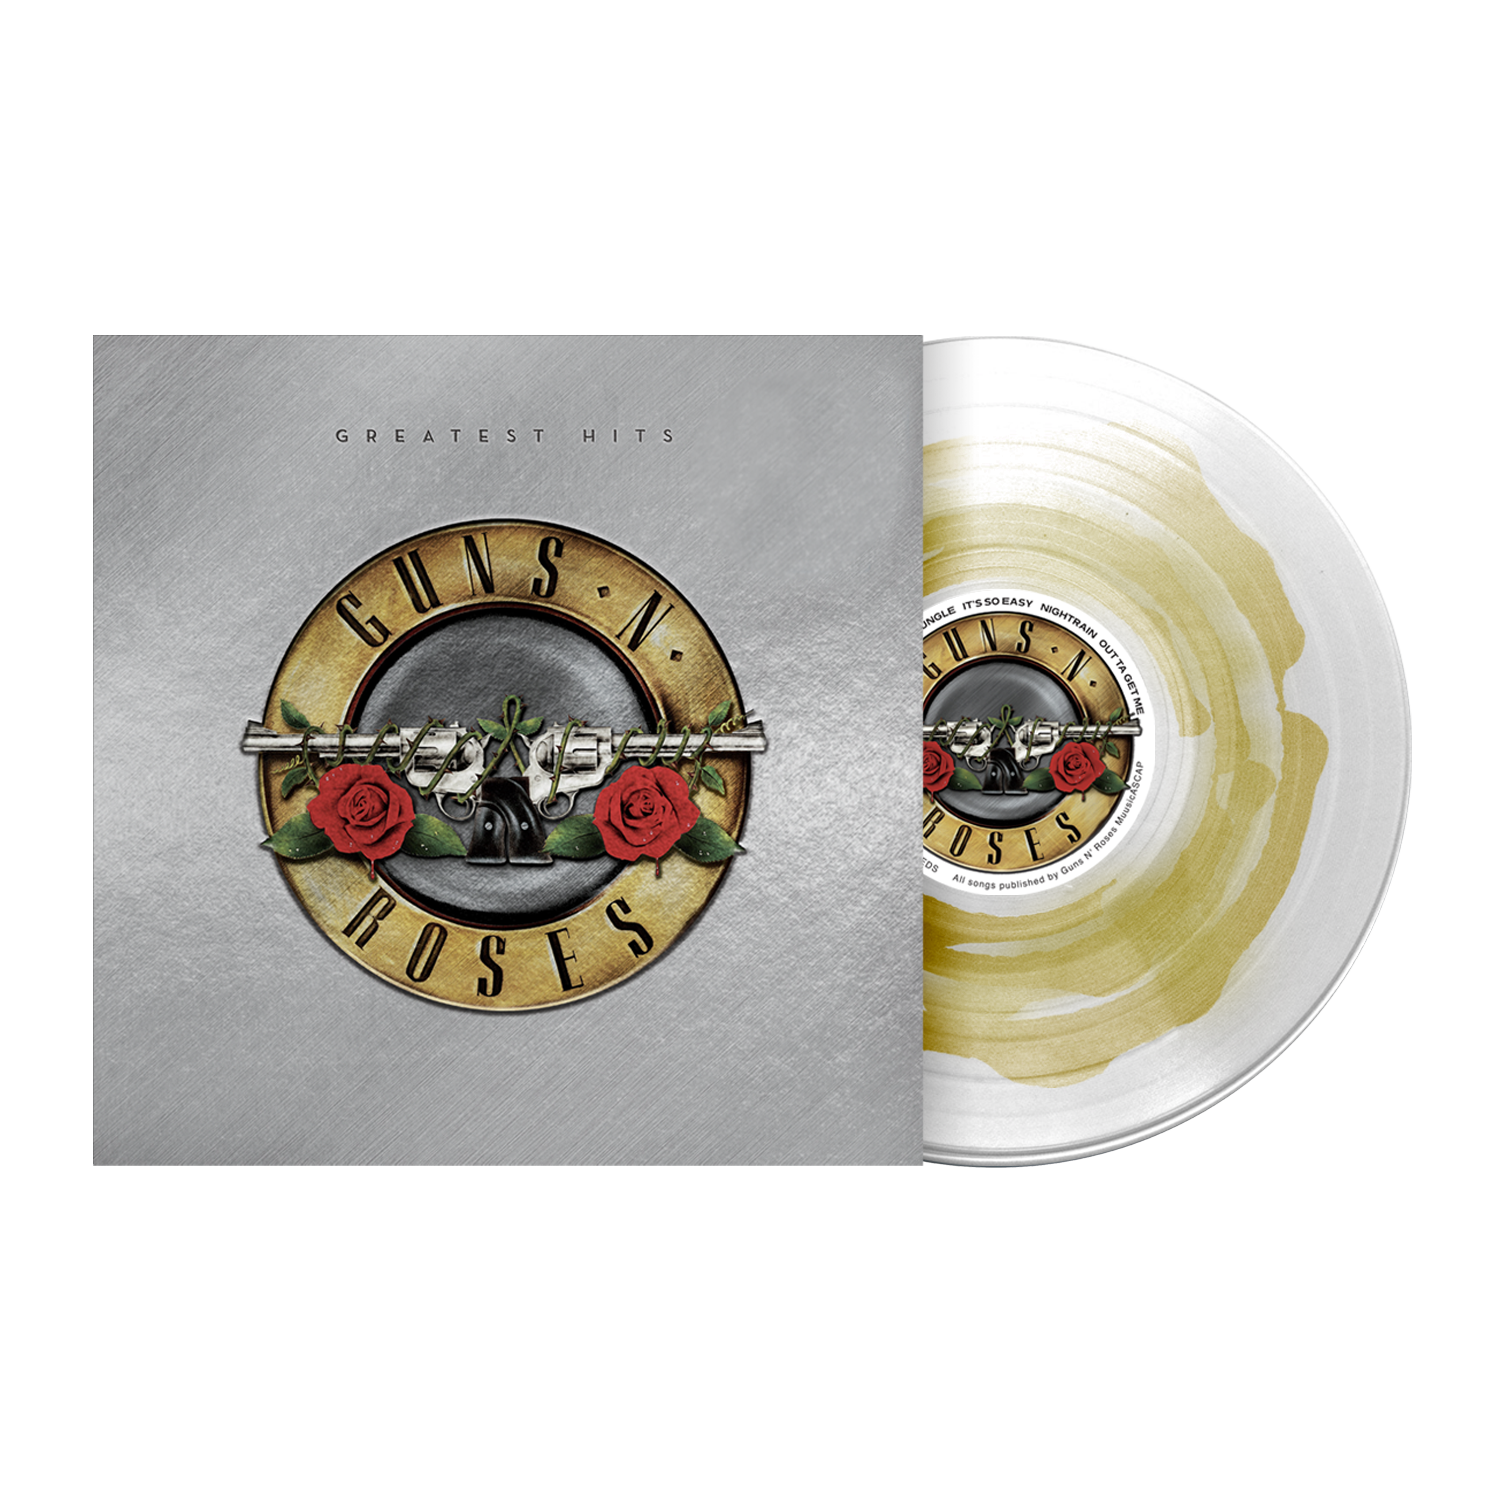 Guns N' Roses - Greatest Hits: Limited Edition Clear/Gold Vinyl LP